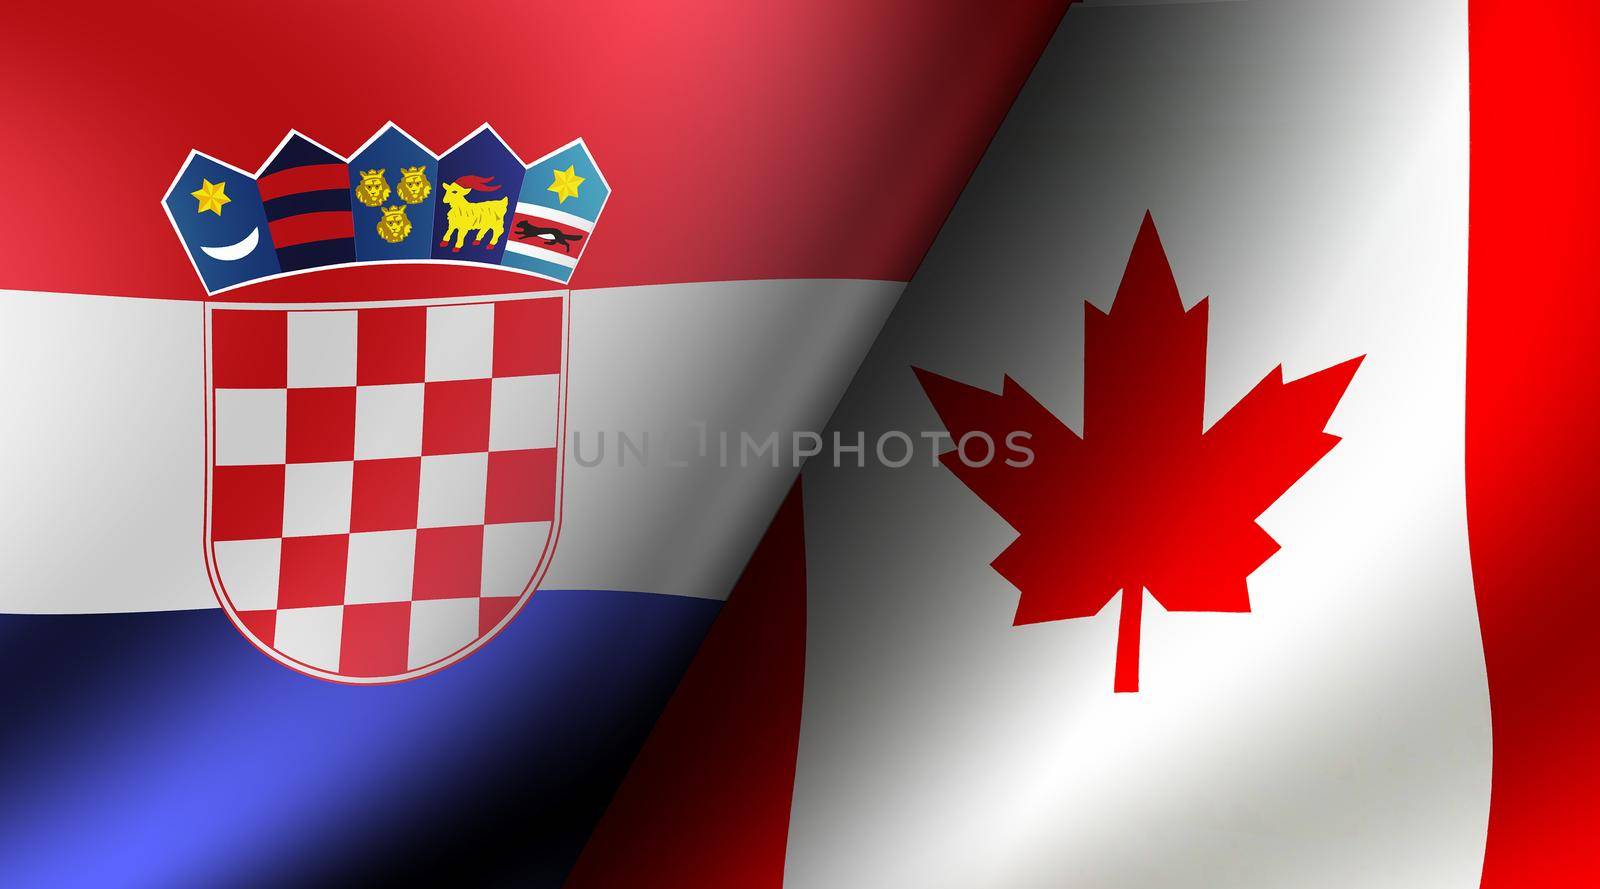 Football 2022 | Group Stage Match Cards ( Croatia VS Canada )